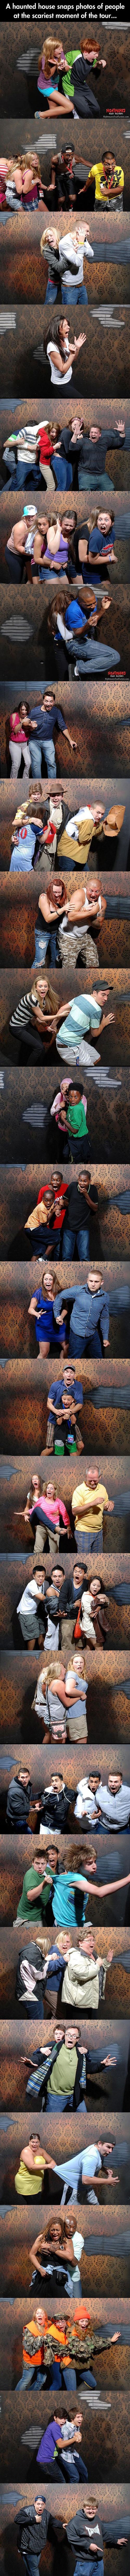 Candid haunted house photos